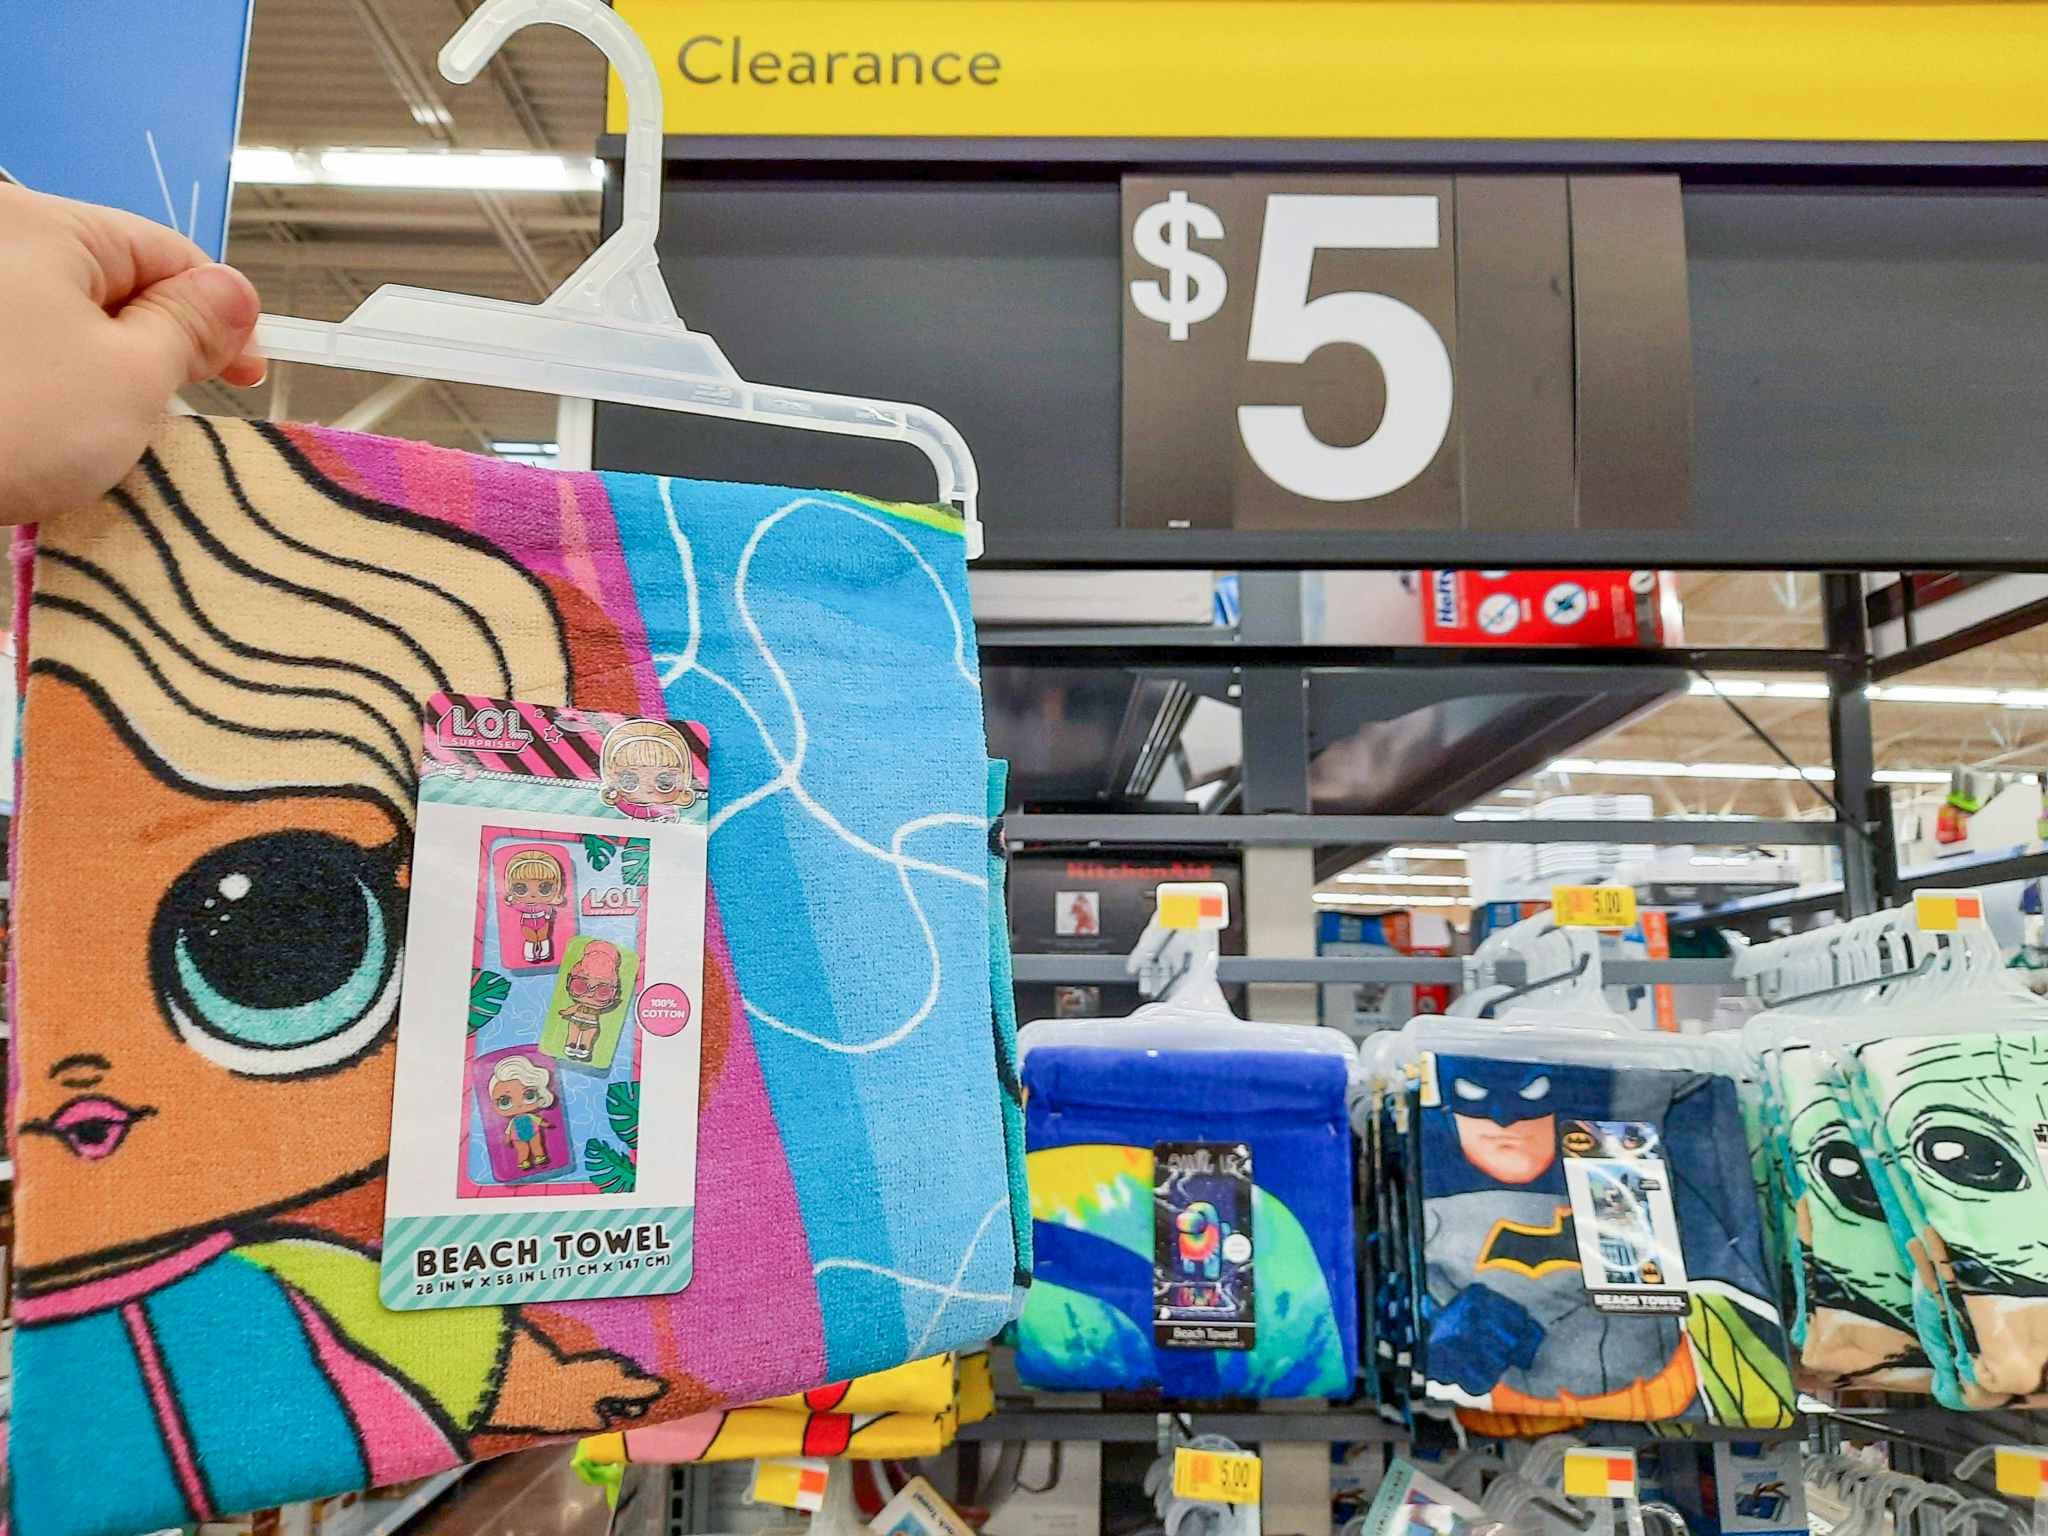 LOL Surprise Beach Towel held in front of $5 clearance sign.